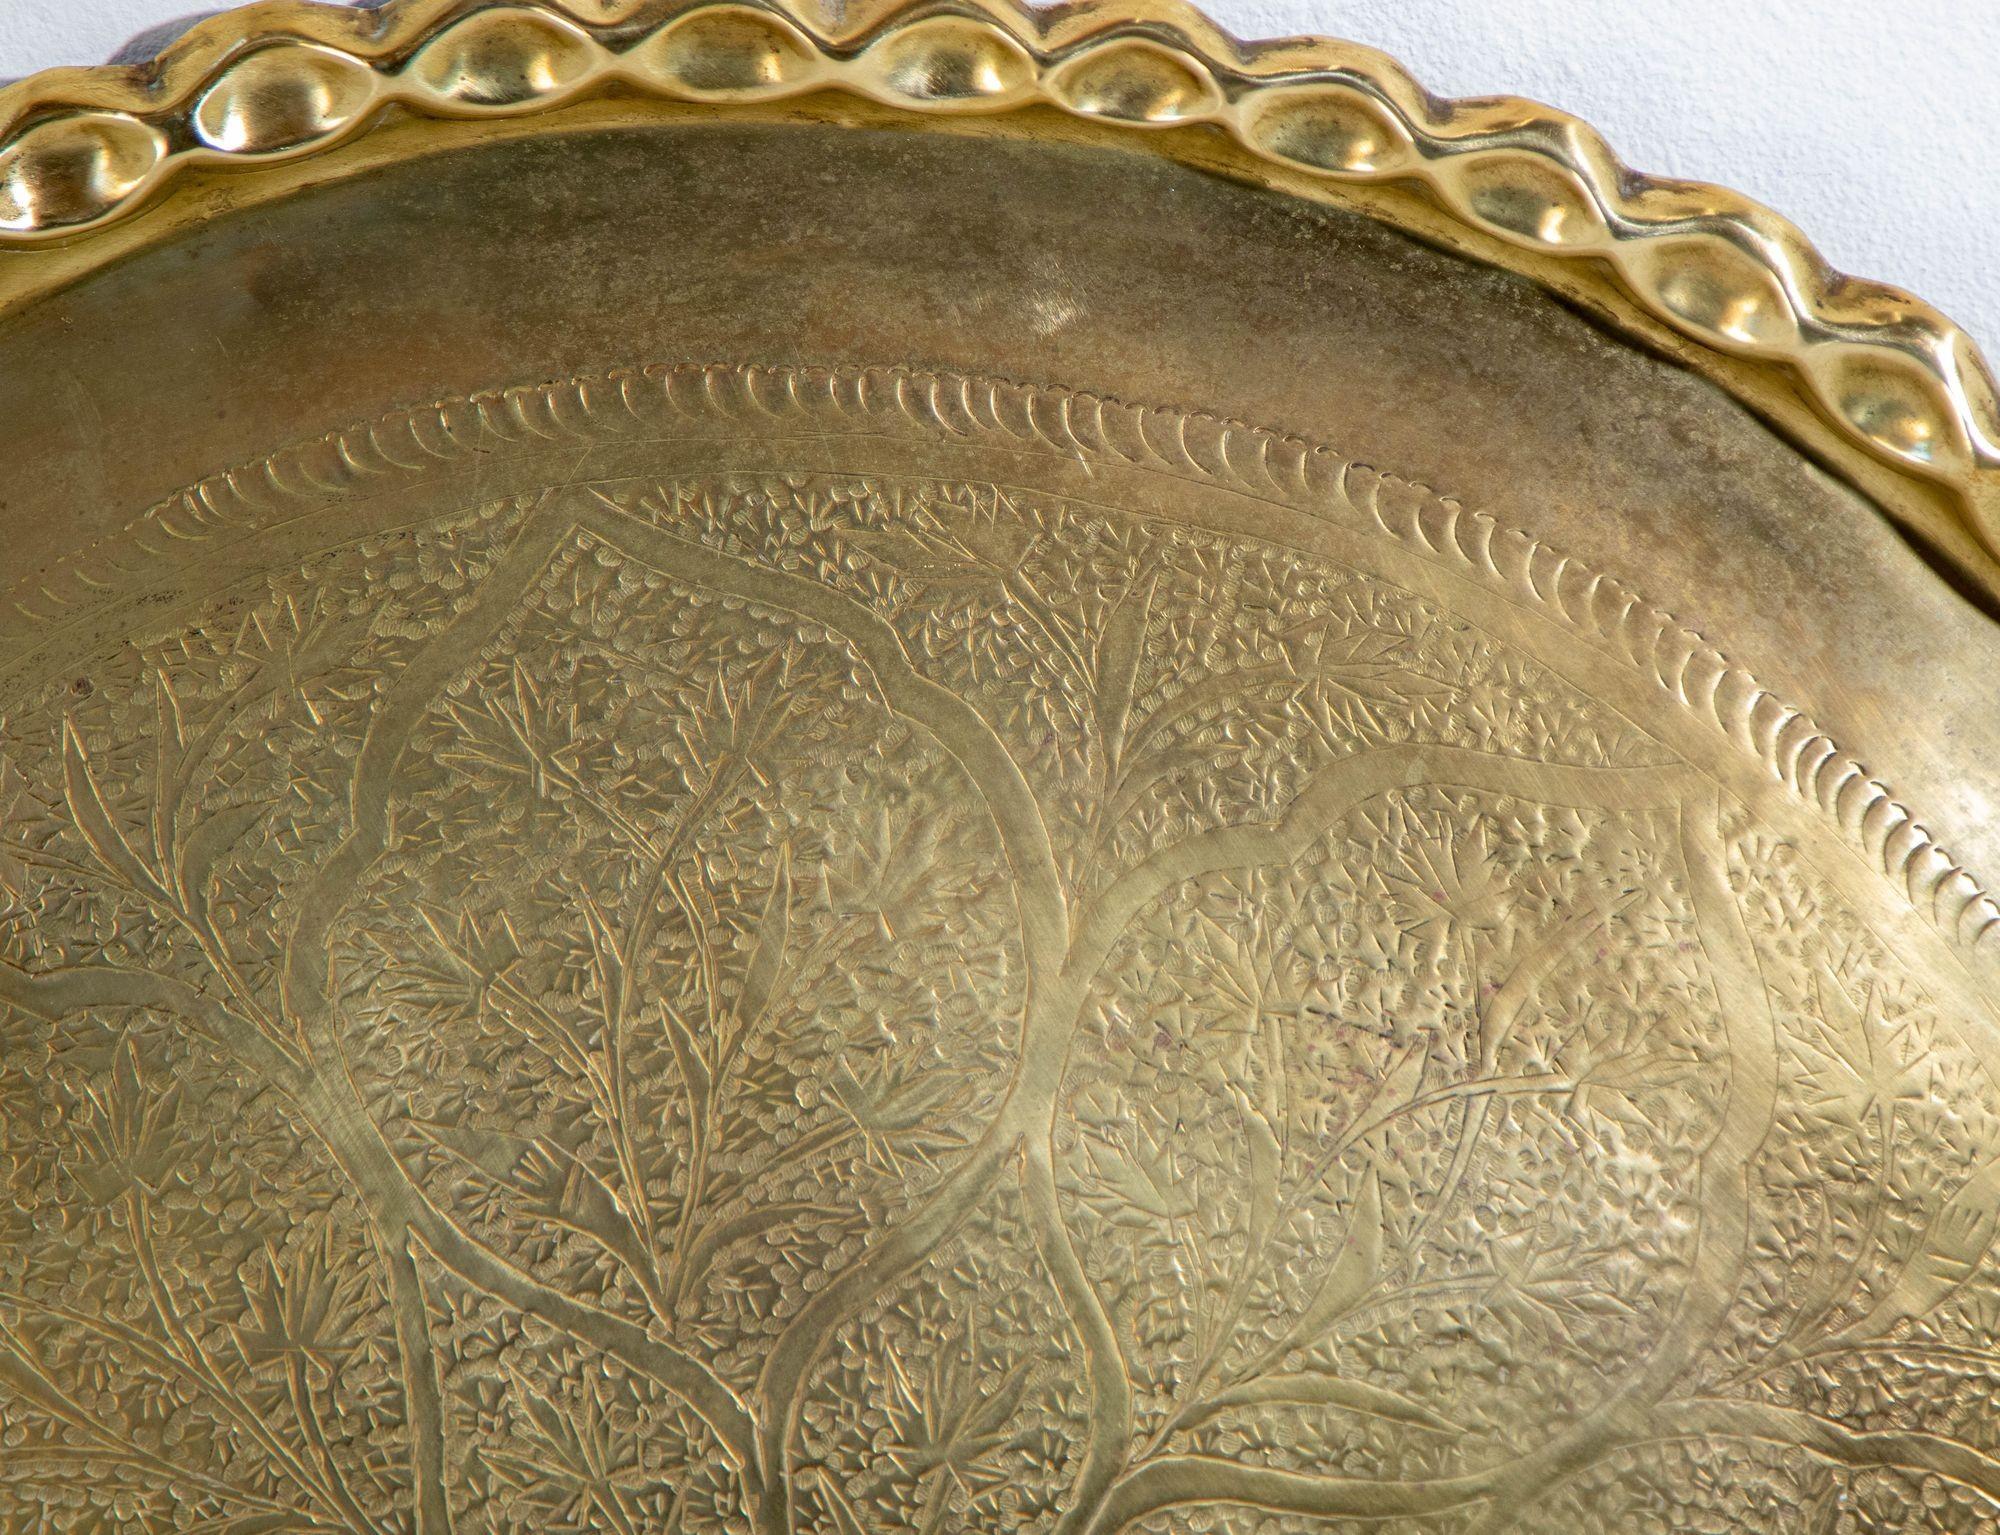 Asian Mughal Rajasthani Large Polished Round Brass Tray with Crest Edges.
Asian Antique Mughal Rajasthani Large Polished round Brass Tray with crest edges, 3o inches in diameter.
Rare find, large antique brass tray 30 inches diameter finely engraved